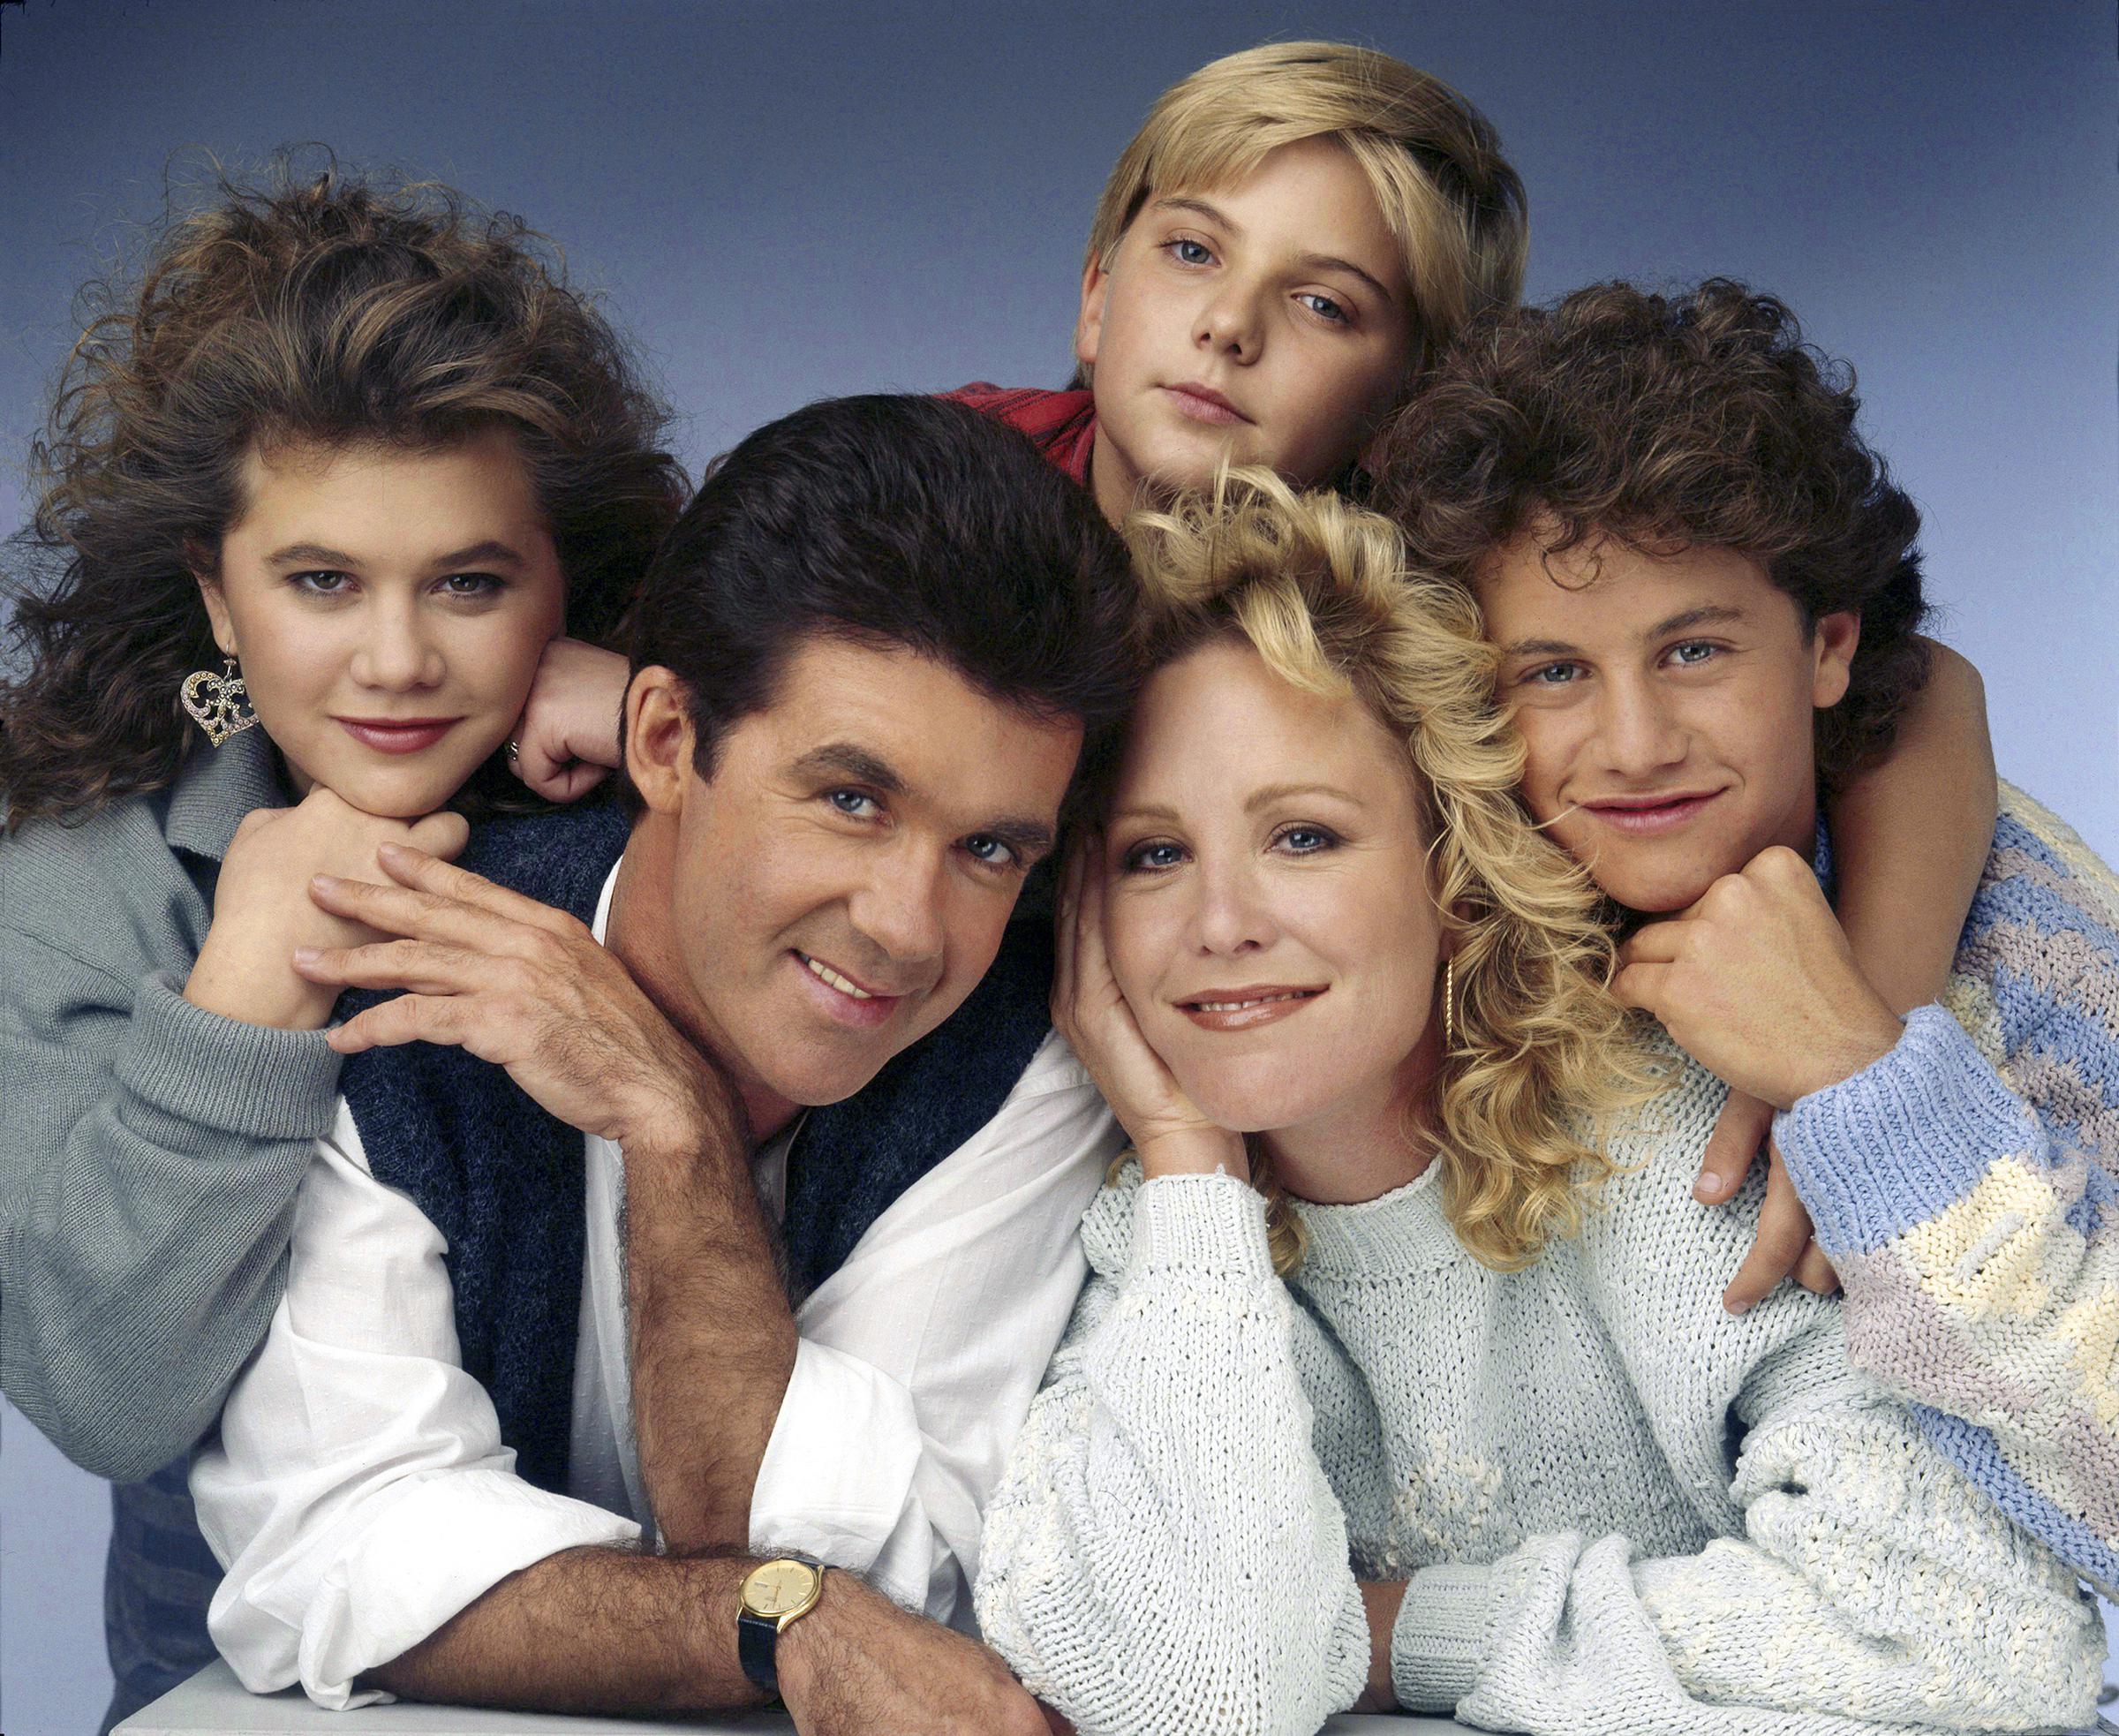 Tracey Gold, Kirk Cameron, and the rest of the cast of season 3 of "Growing Pains" Circa 1987. | Source: Getty Images